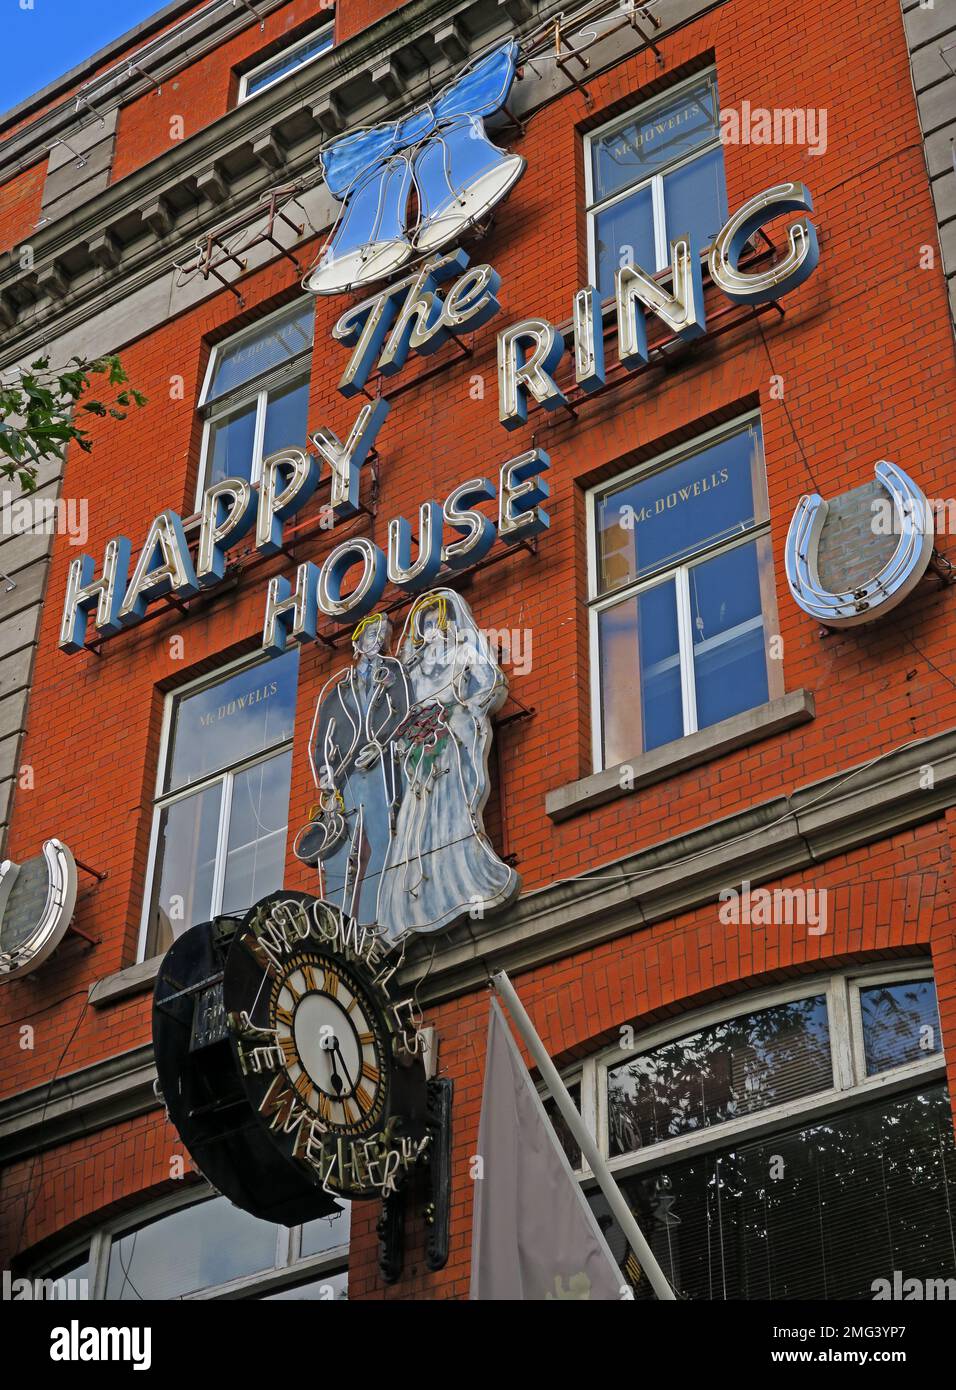 The Happy Ring House, McDowells Jewelers, 3 O'Connell Street Upper, North City, Dublin 1, D01 CD9, Eire, Irlande Banque D'Images